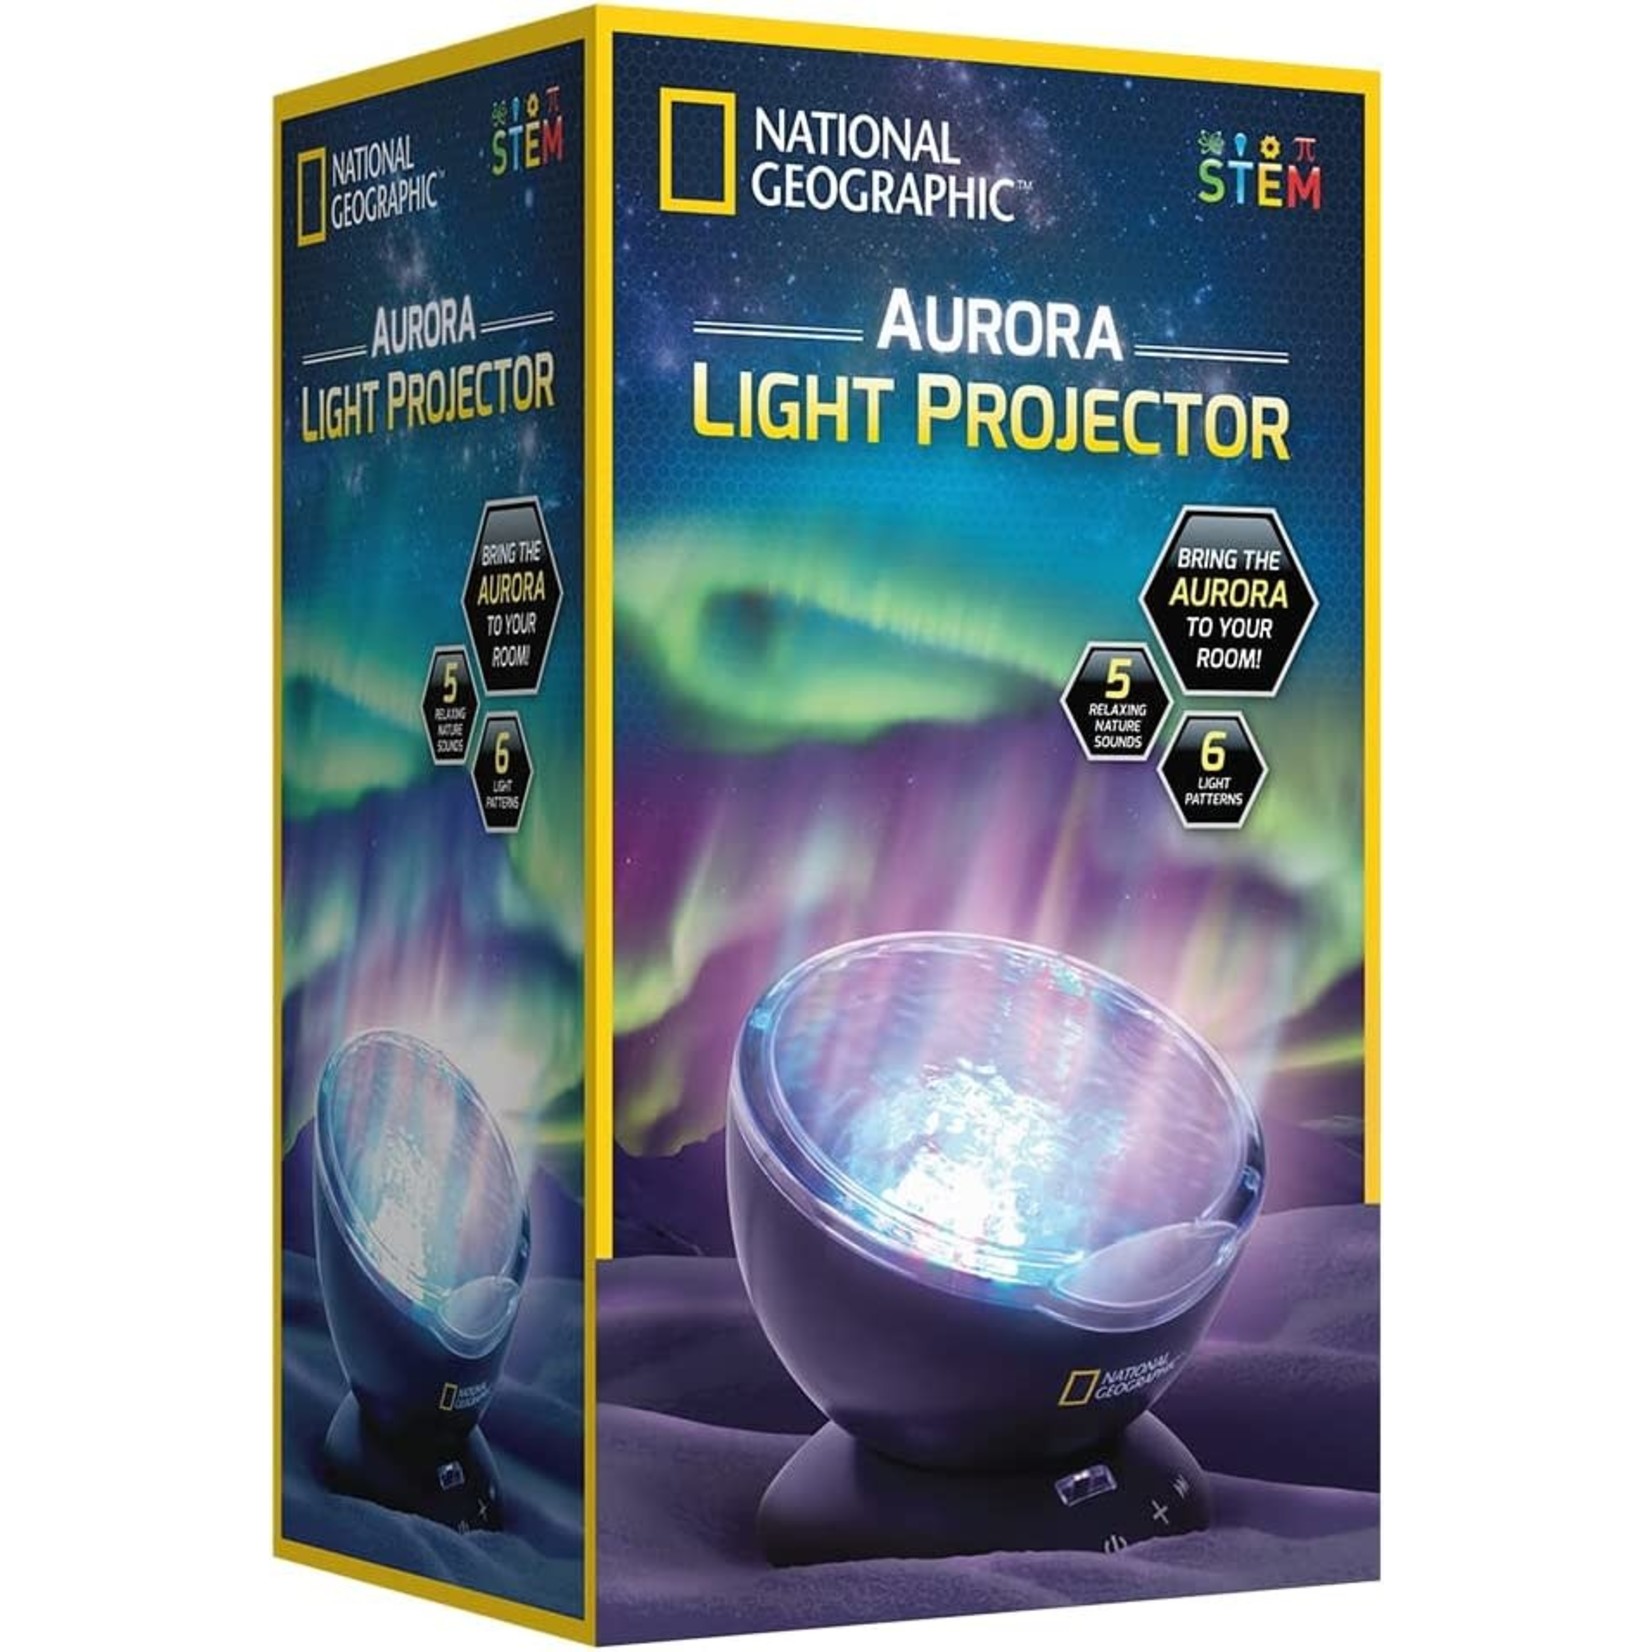 NATIONAL GEOGRAPHIC National Geographic Aurora Light Projector